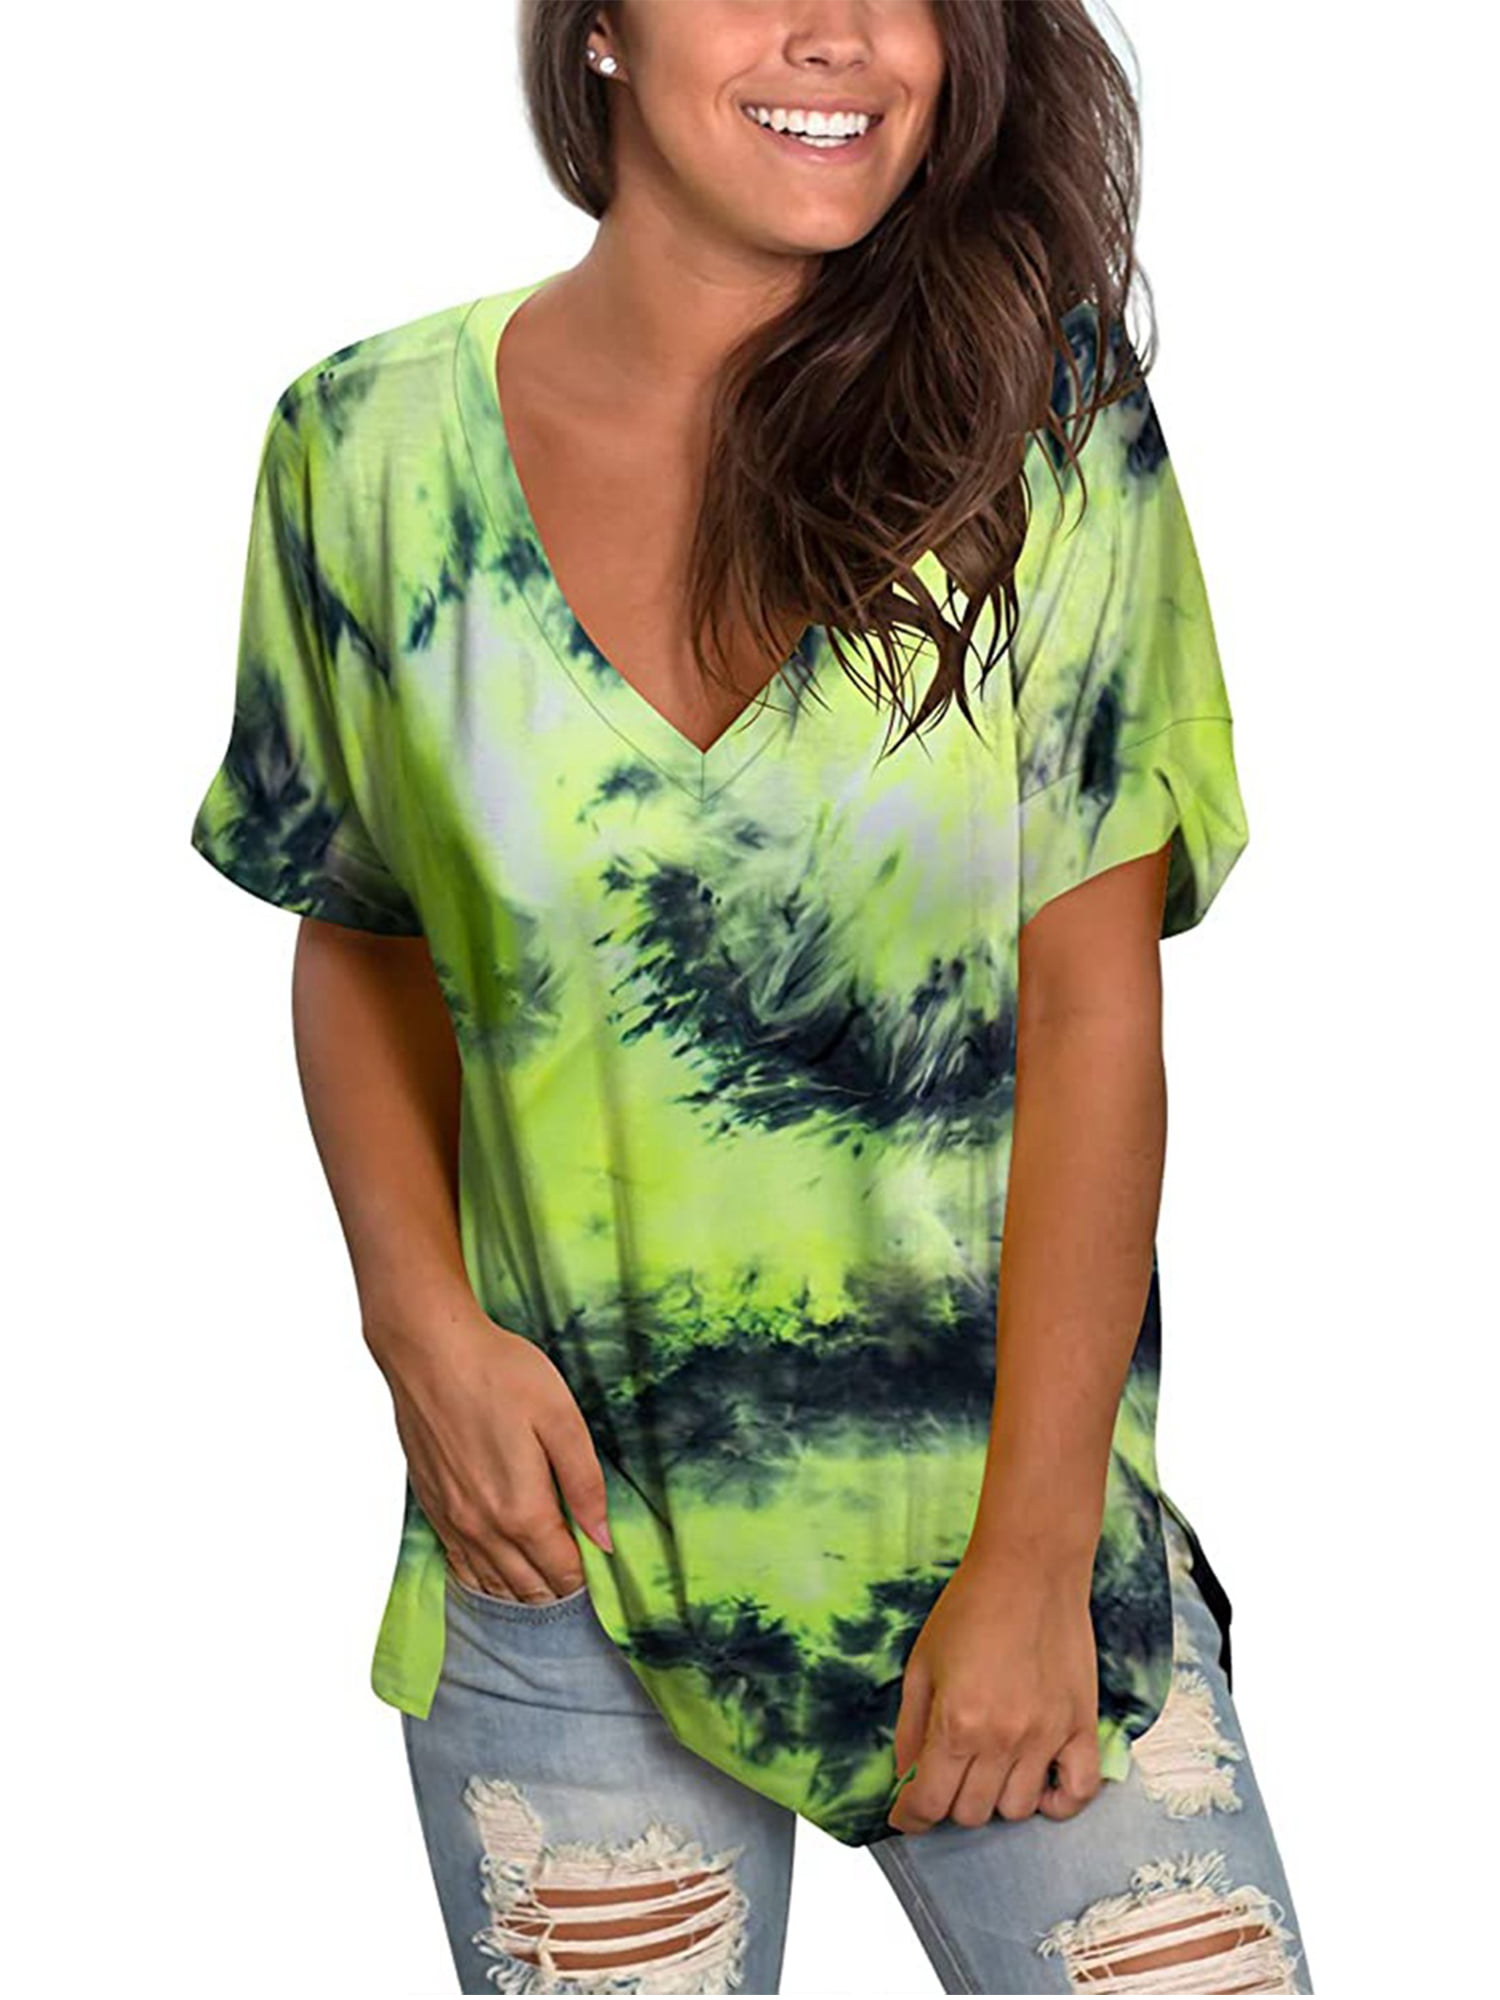 Women's Casual Gradient Color Short Sleeved T-Shirt Loose Stylish Blouse Tops 